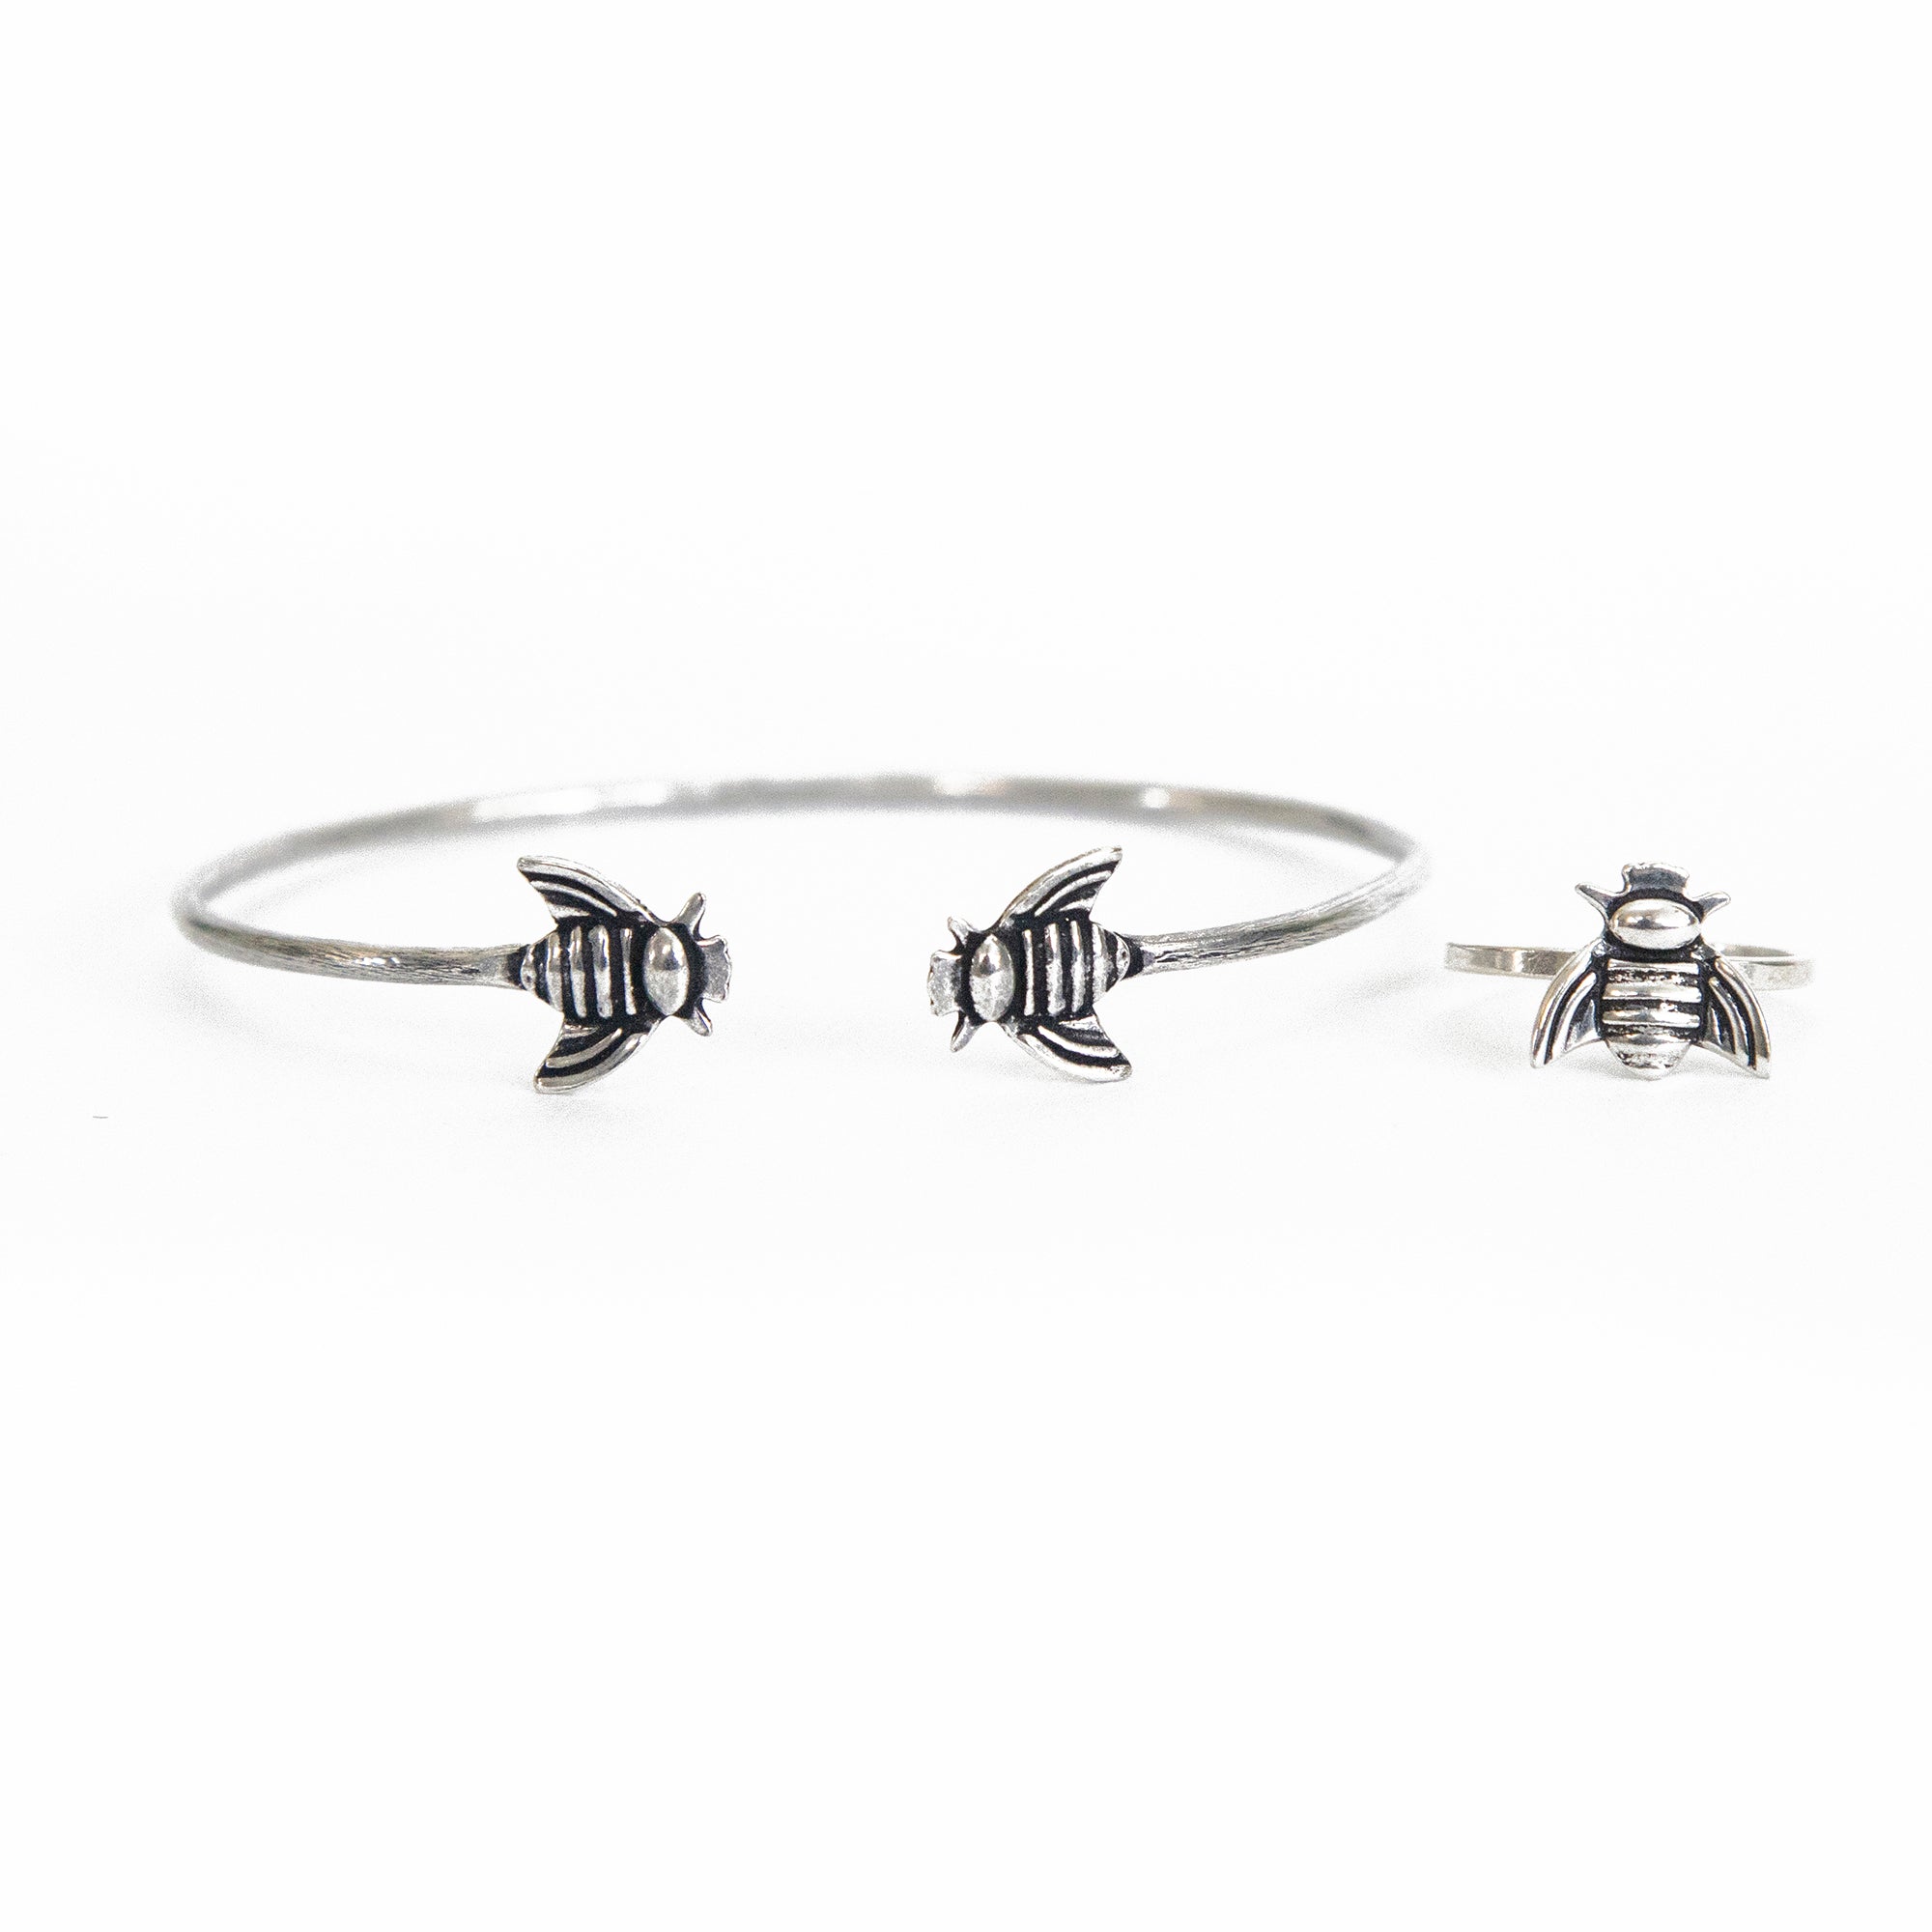 Bumble Bee Jewelry Silver Cuff Bee Bracelet and Silver Bee Stud Earrings